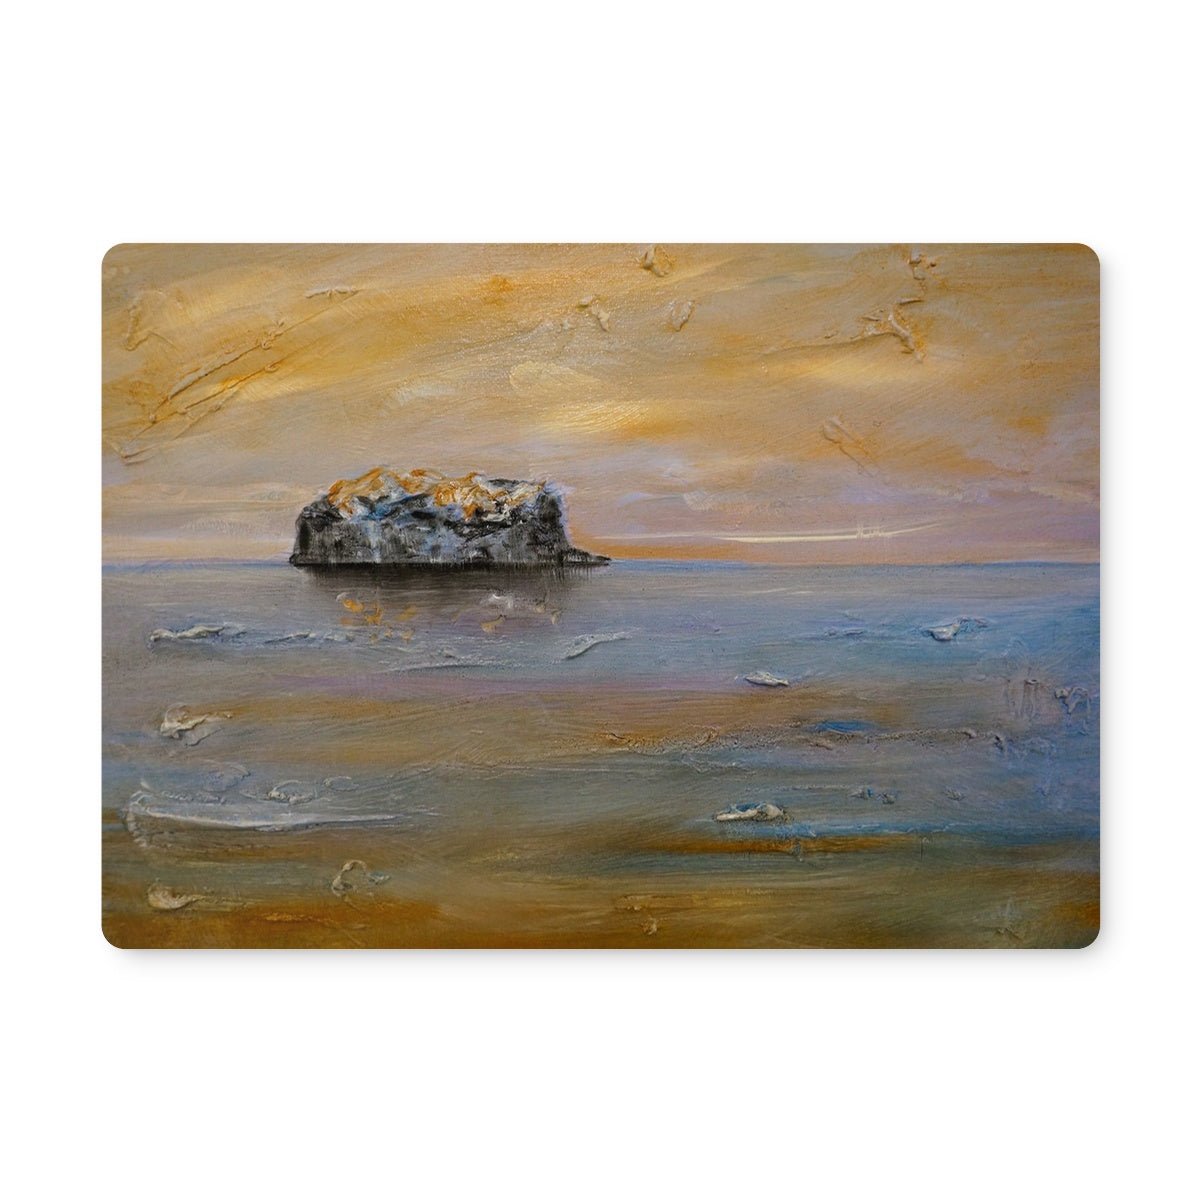 Bass Rock Dawn Art Gifts Placemat-Placemats-Edinburgh & Glasgow Art Gallery-Single Placemat-Paintings, Prints, Homeware, Art Gifts From Scotland By Scottish Artist Kevin Hunter